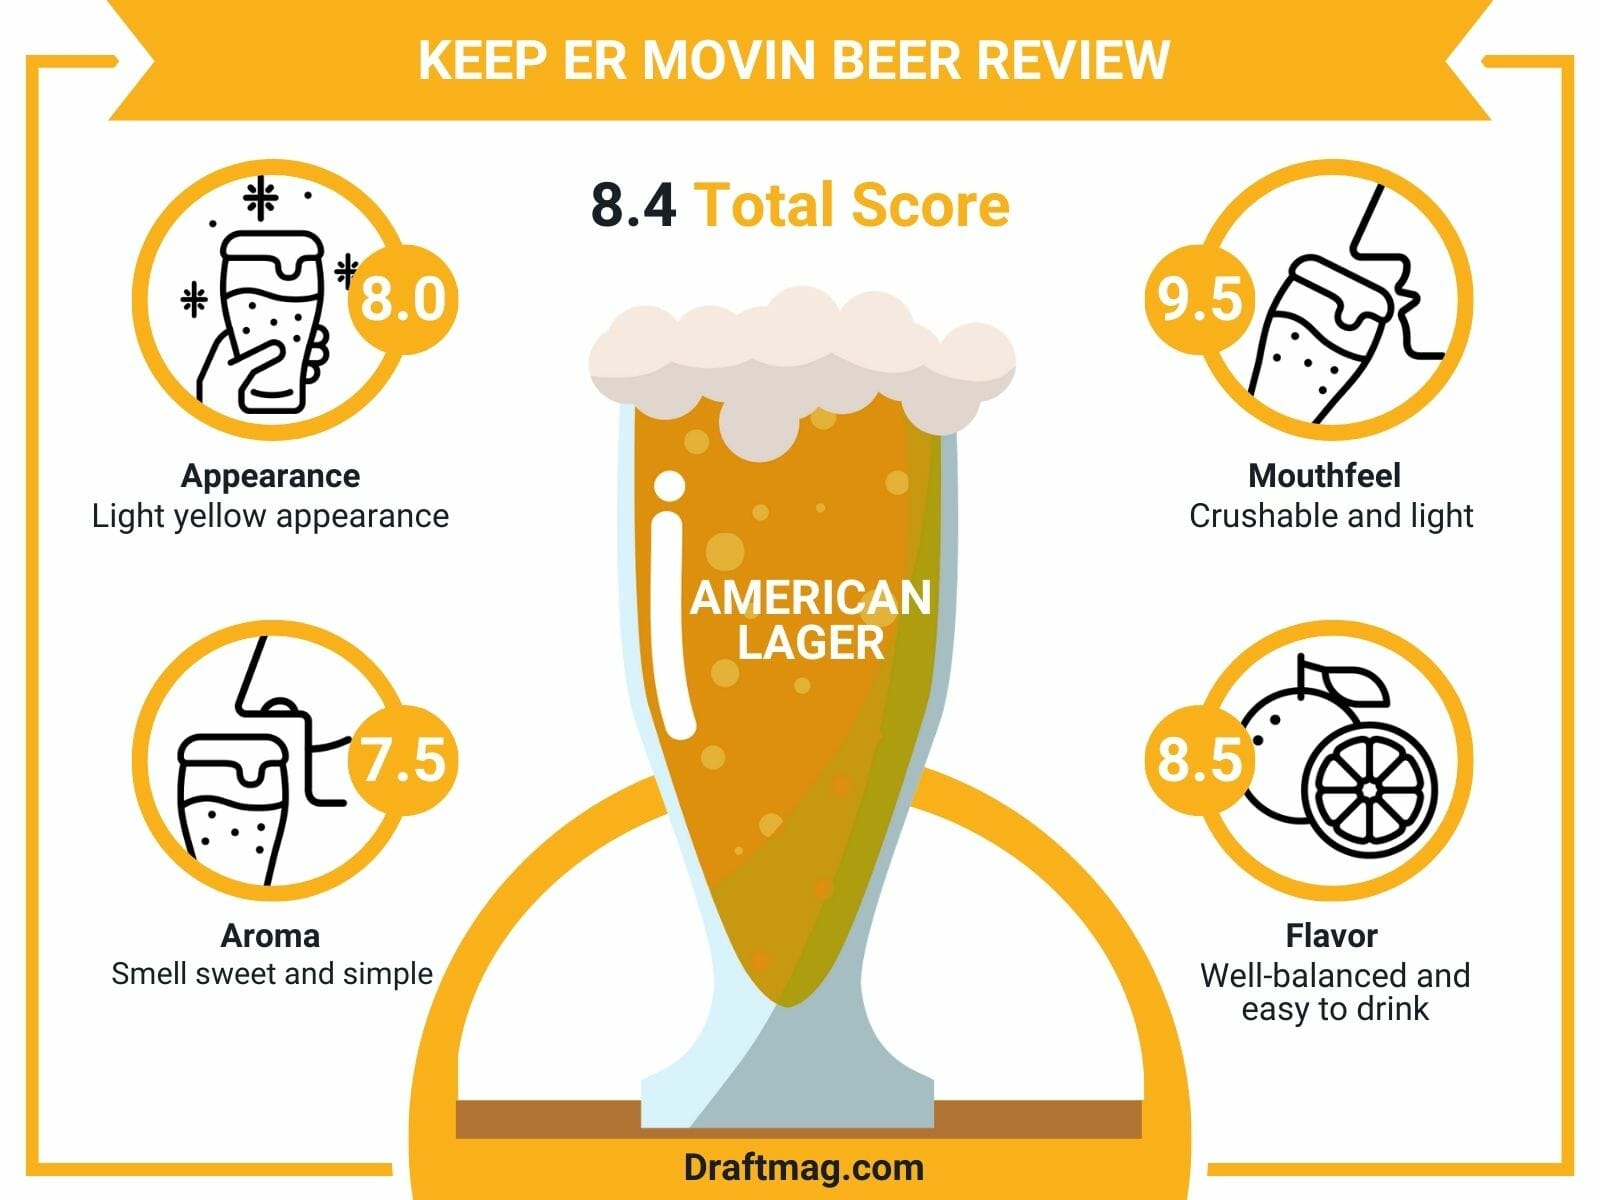 Keep Er Movin Beer Review Infographic